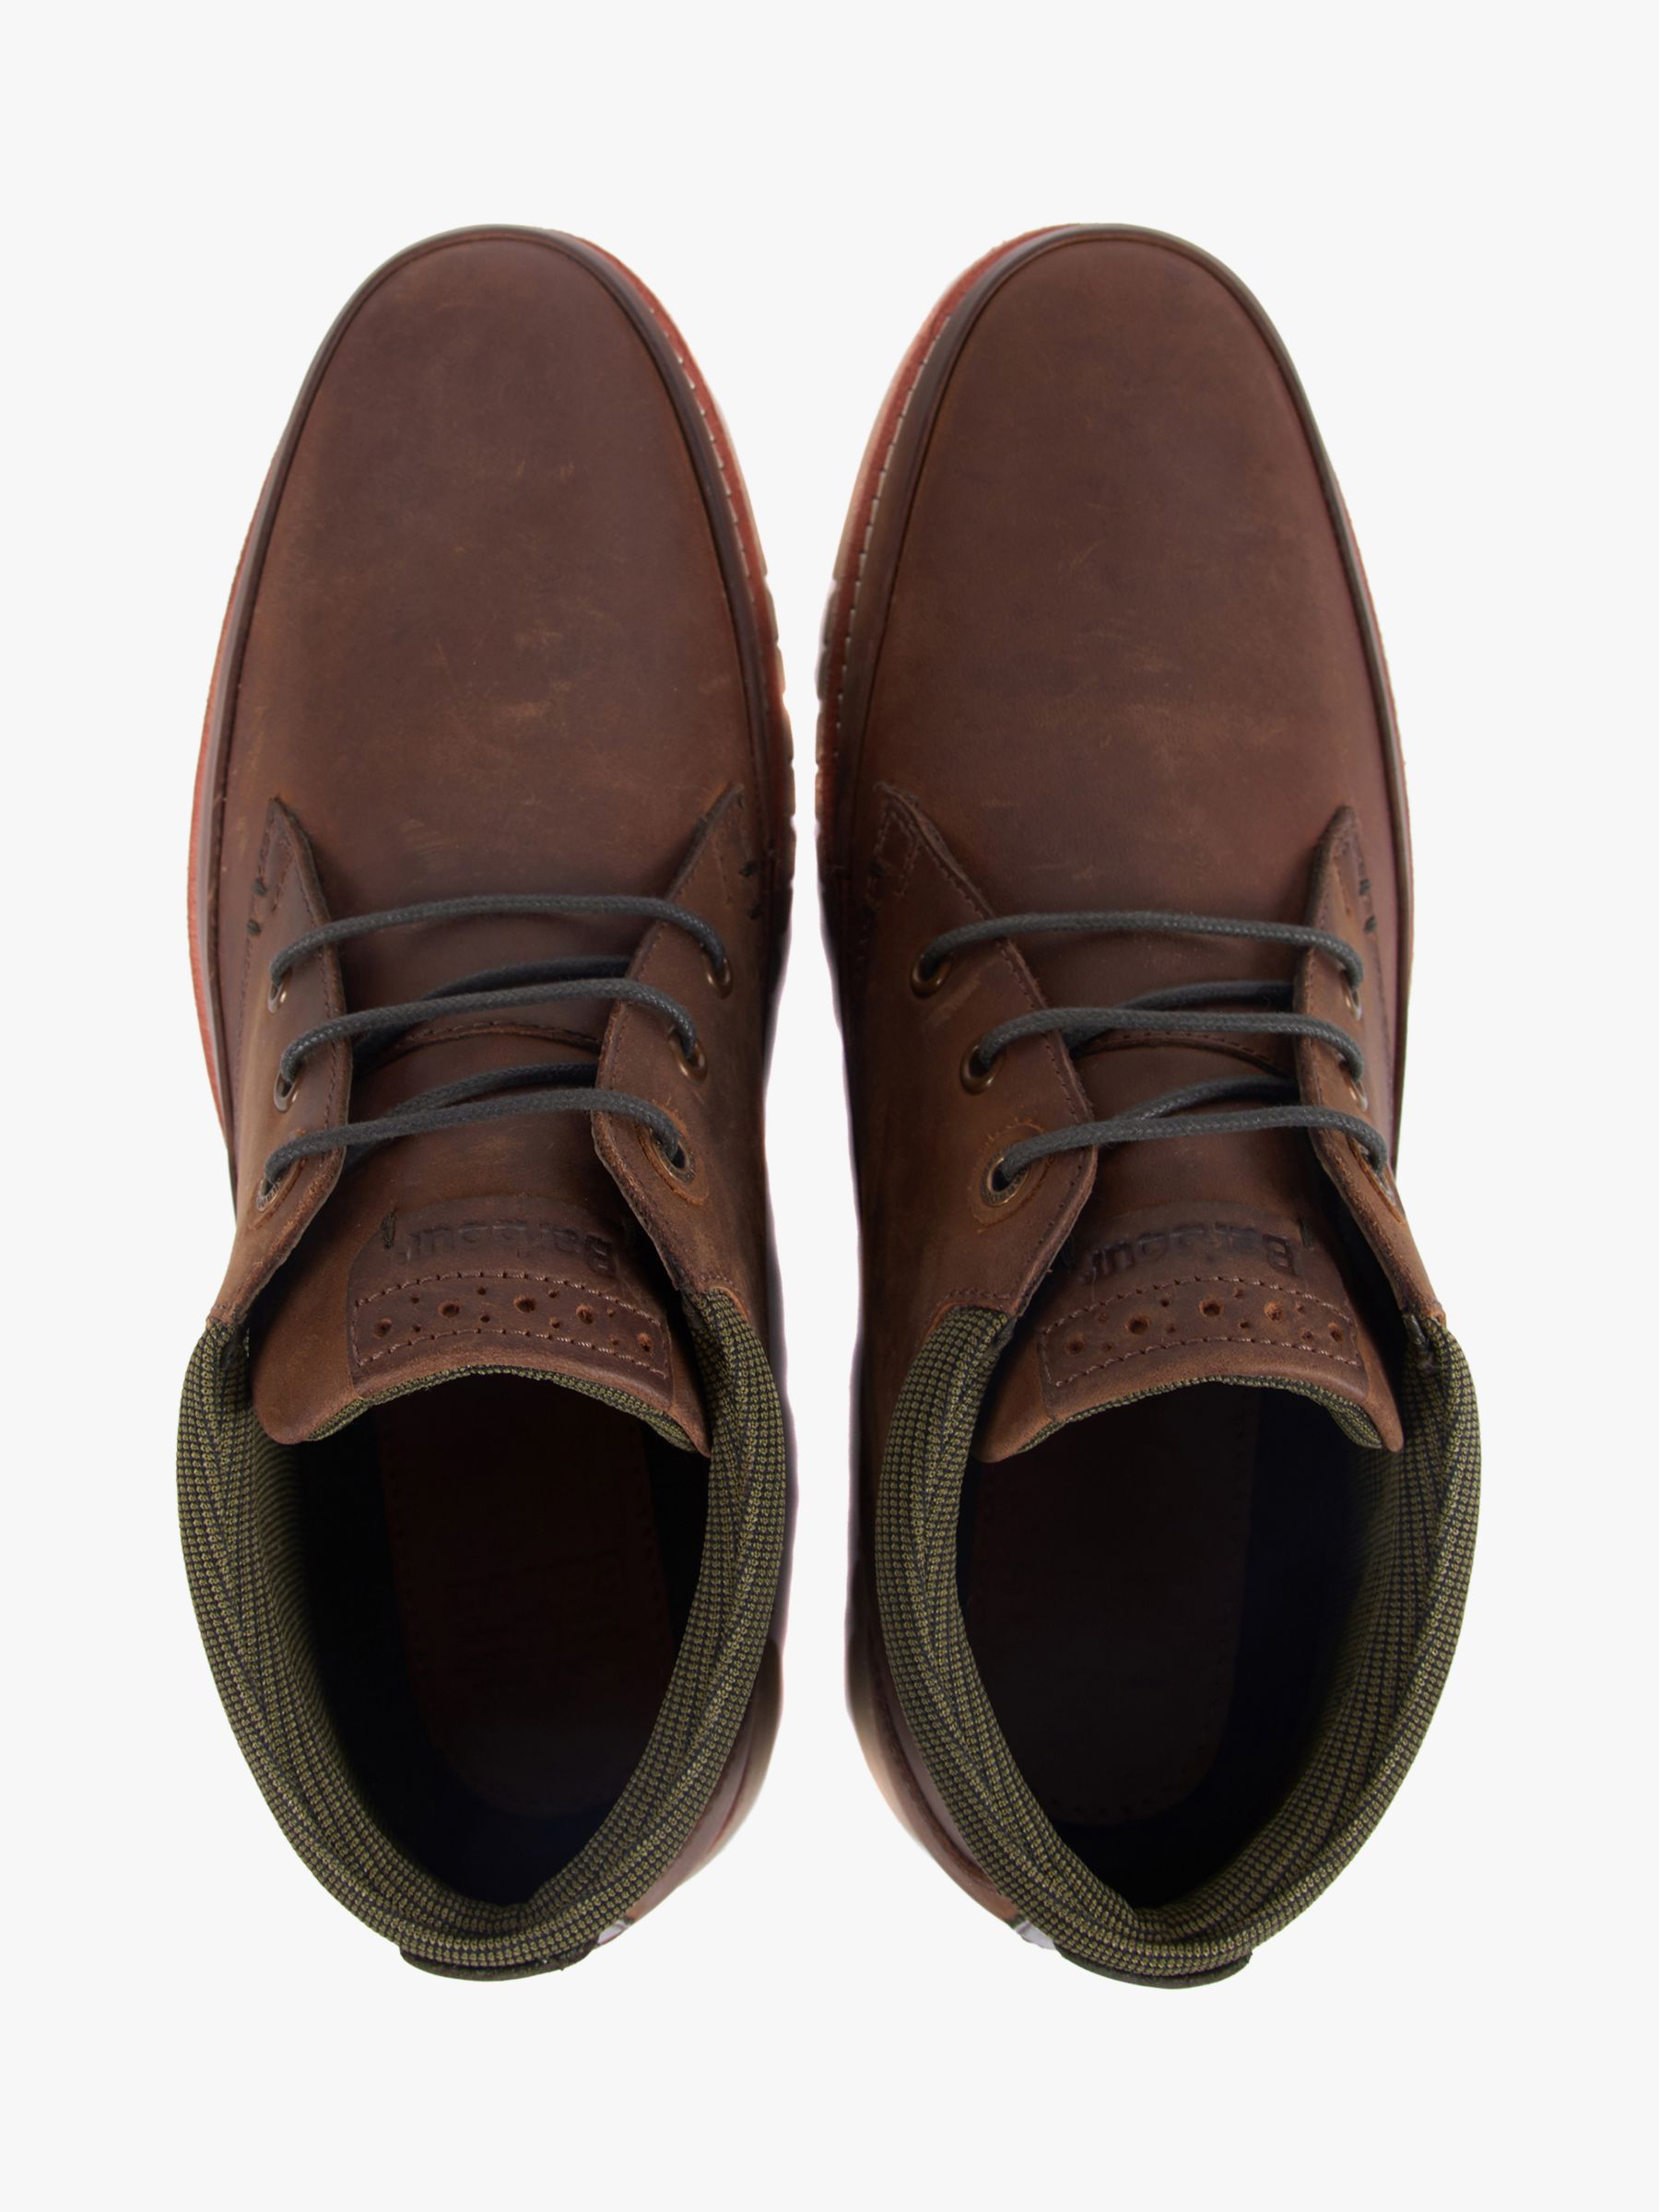 Barbour Nelson Mudguard Chukka Boots, Choco at John Lewis & Partners